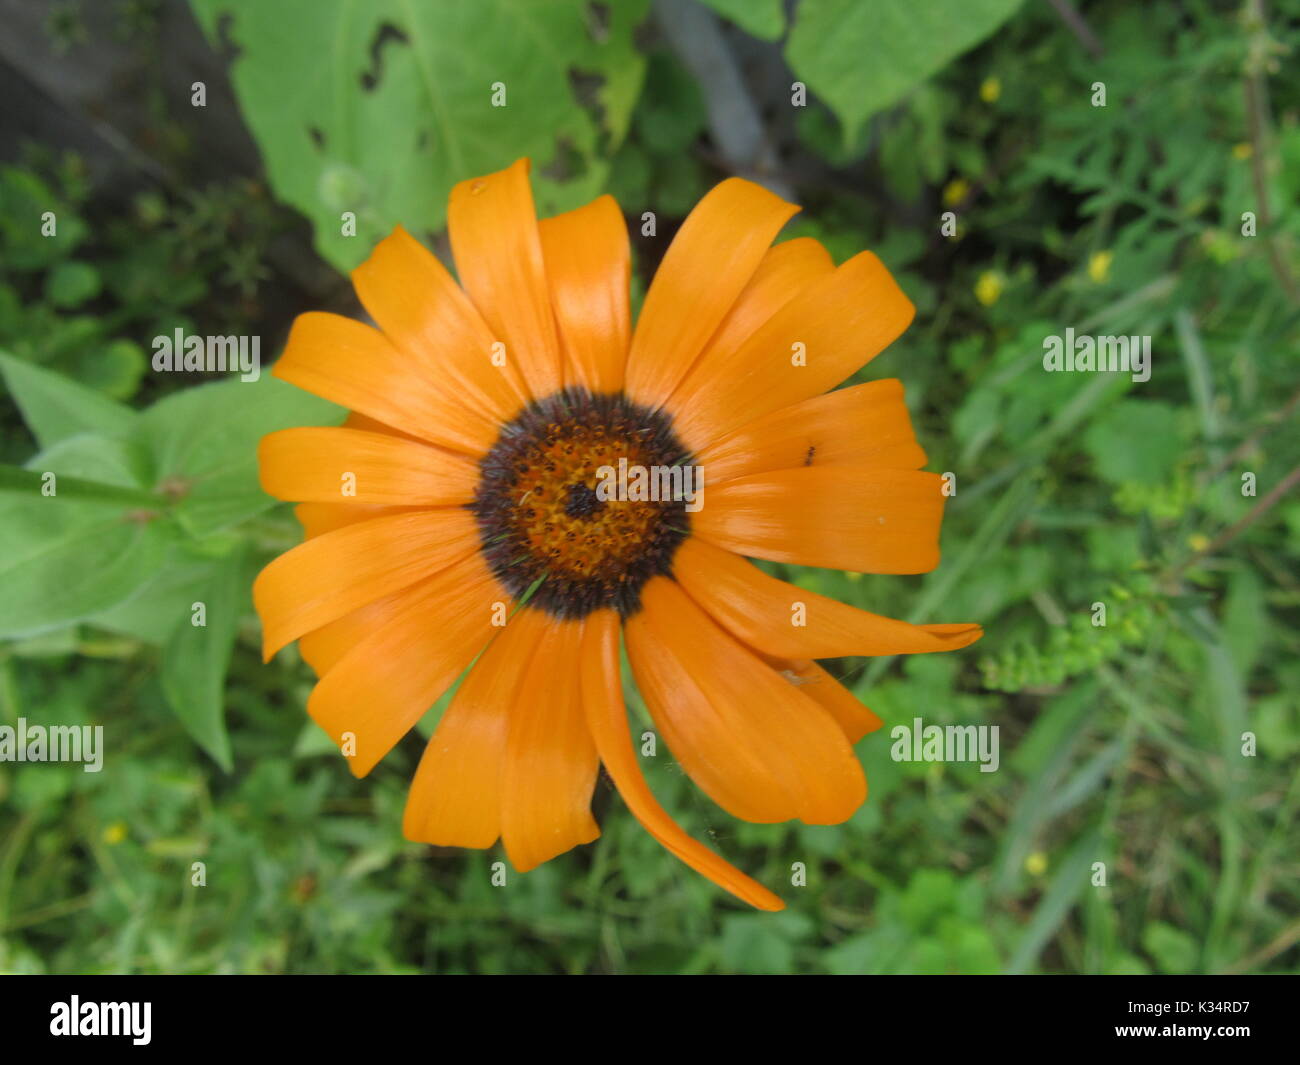 Easy to grow garden flowers in various colors and types.  Daisy type flowers. Stock Photo